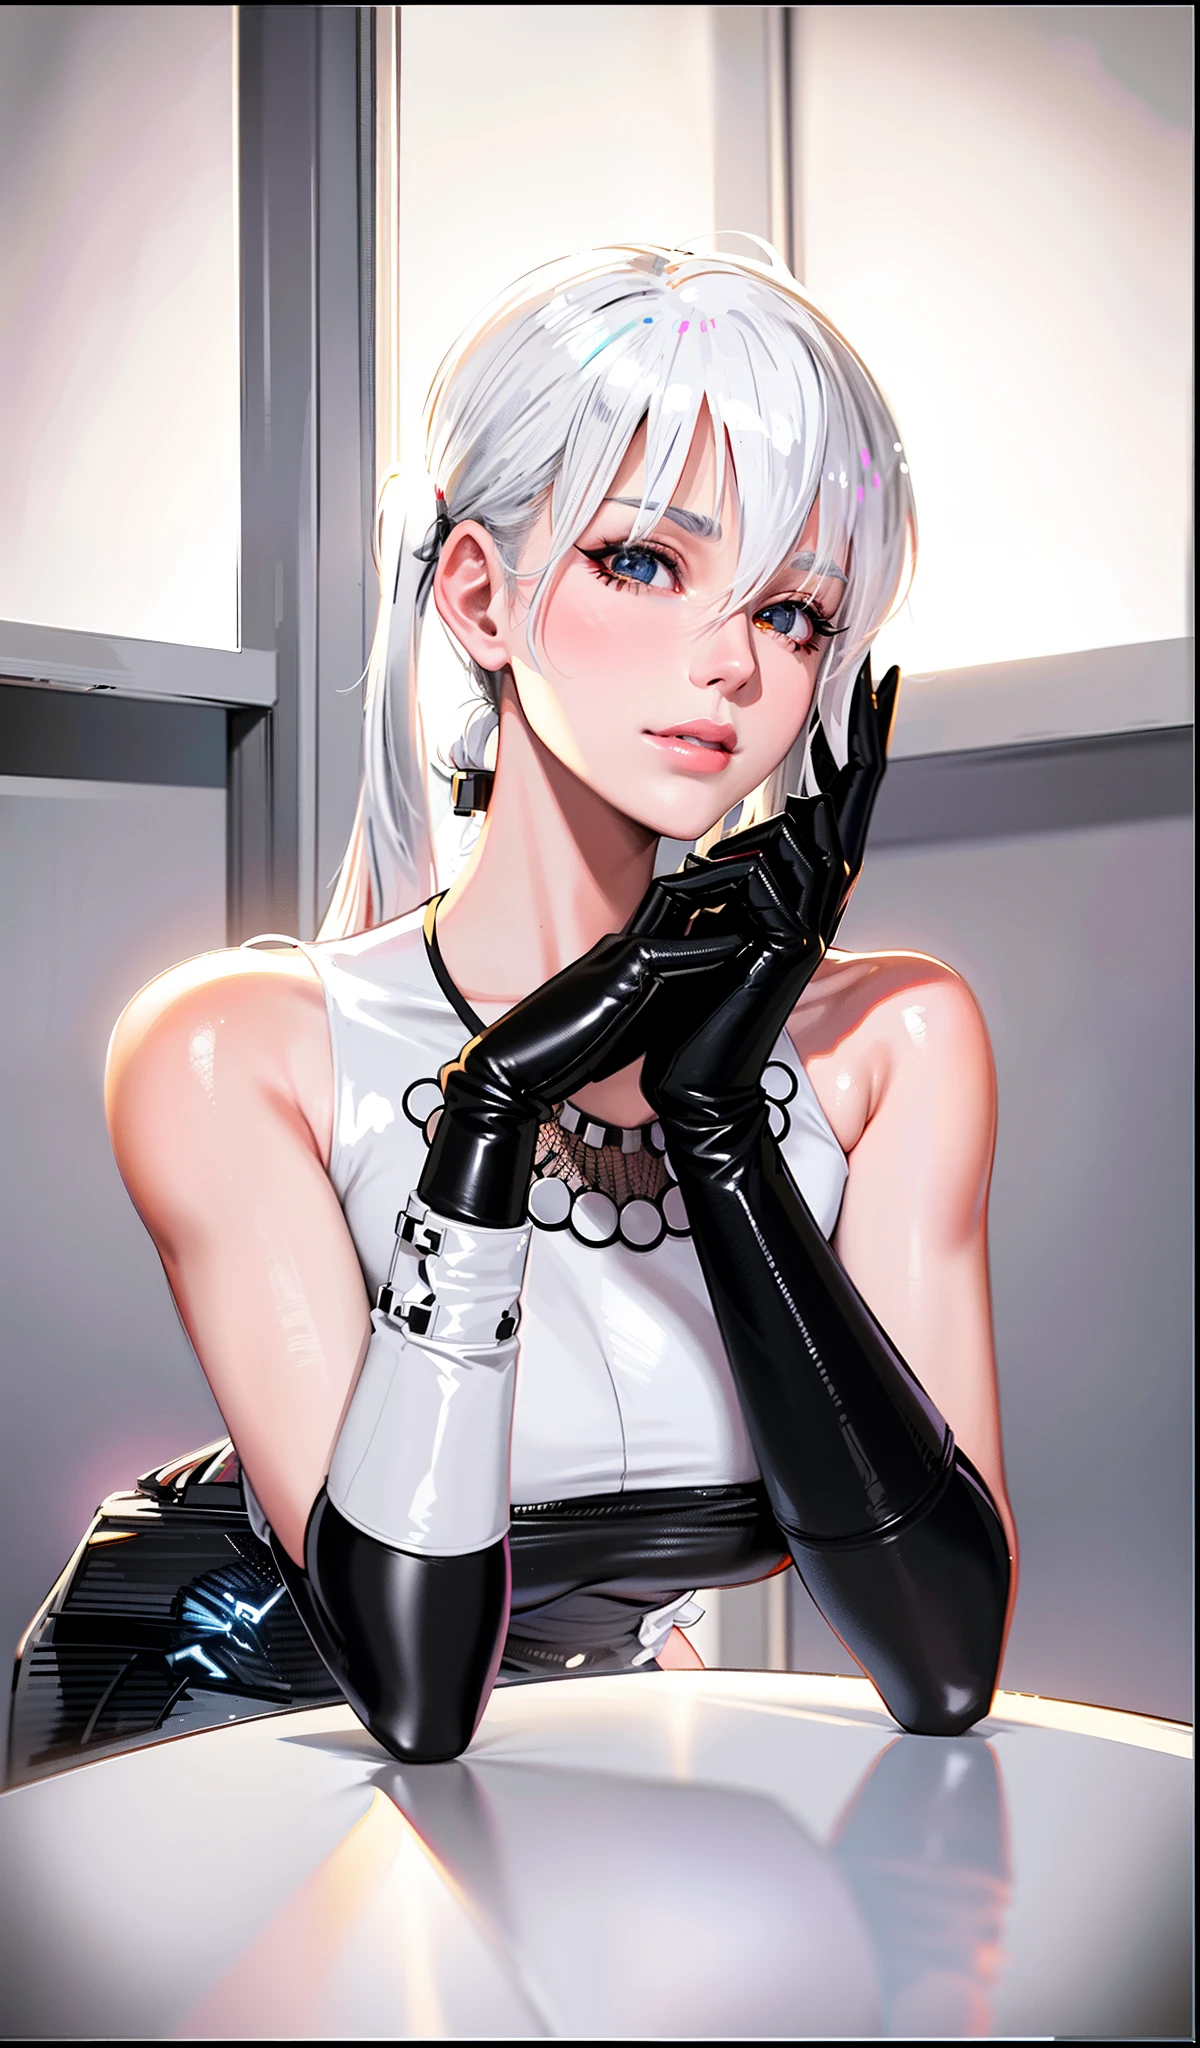 anime girl with white hair and black gloves posing for a picture, cyborg - girl with silver hair, tifa lockhart with white hair, seductive anime girl, twintails white_gloves, anime barbie in white stockings, beautiful alluring anime woman, photorealistic anime girl render, perfect white haired girl, 2 b, 2b, perfect android girl, girl with white hair